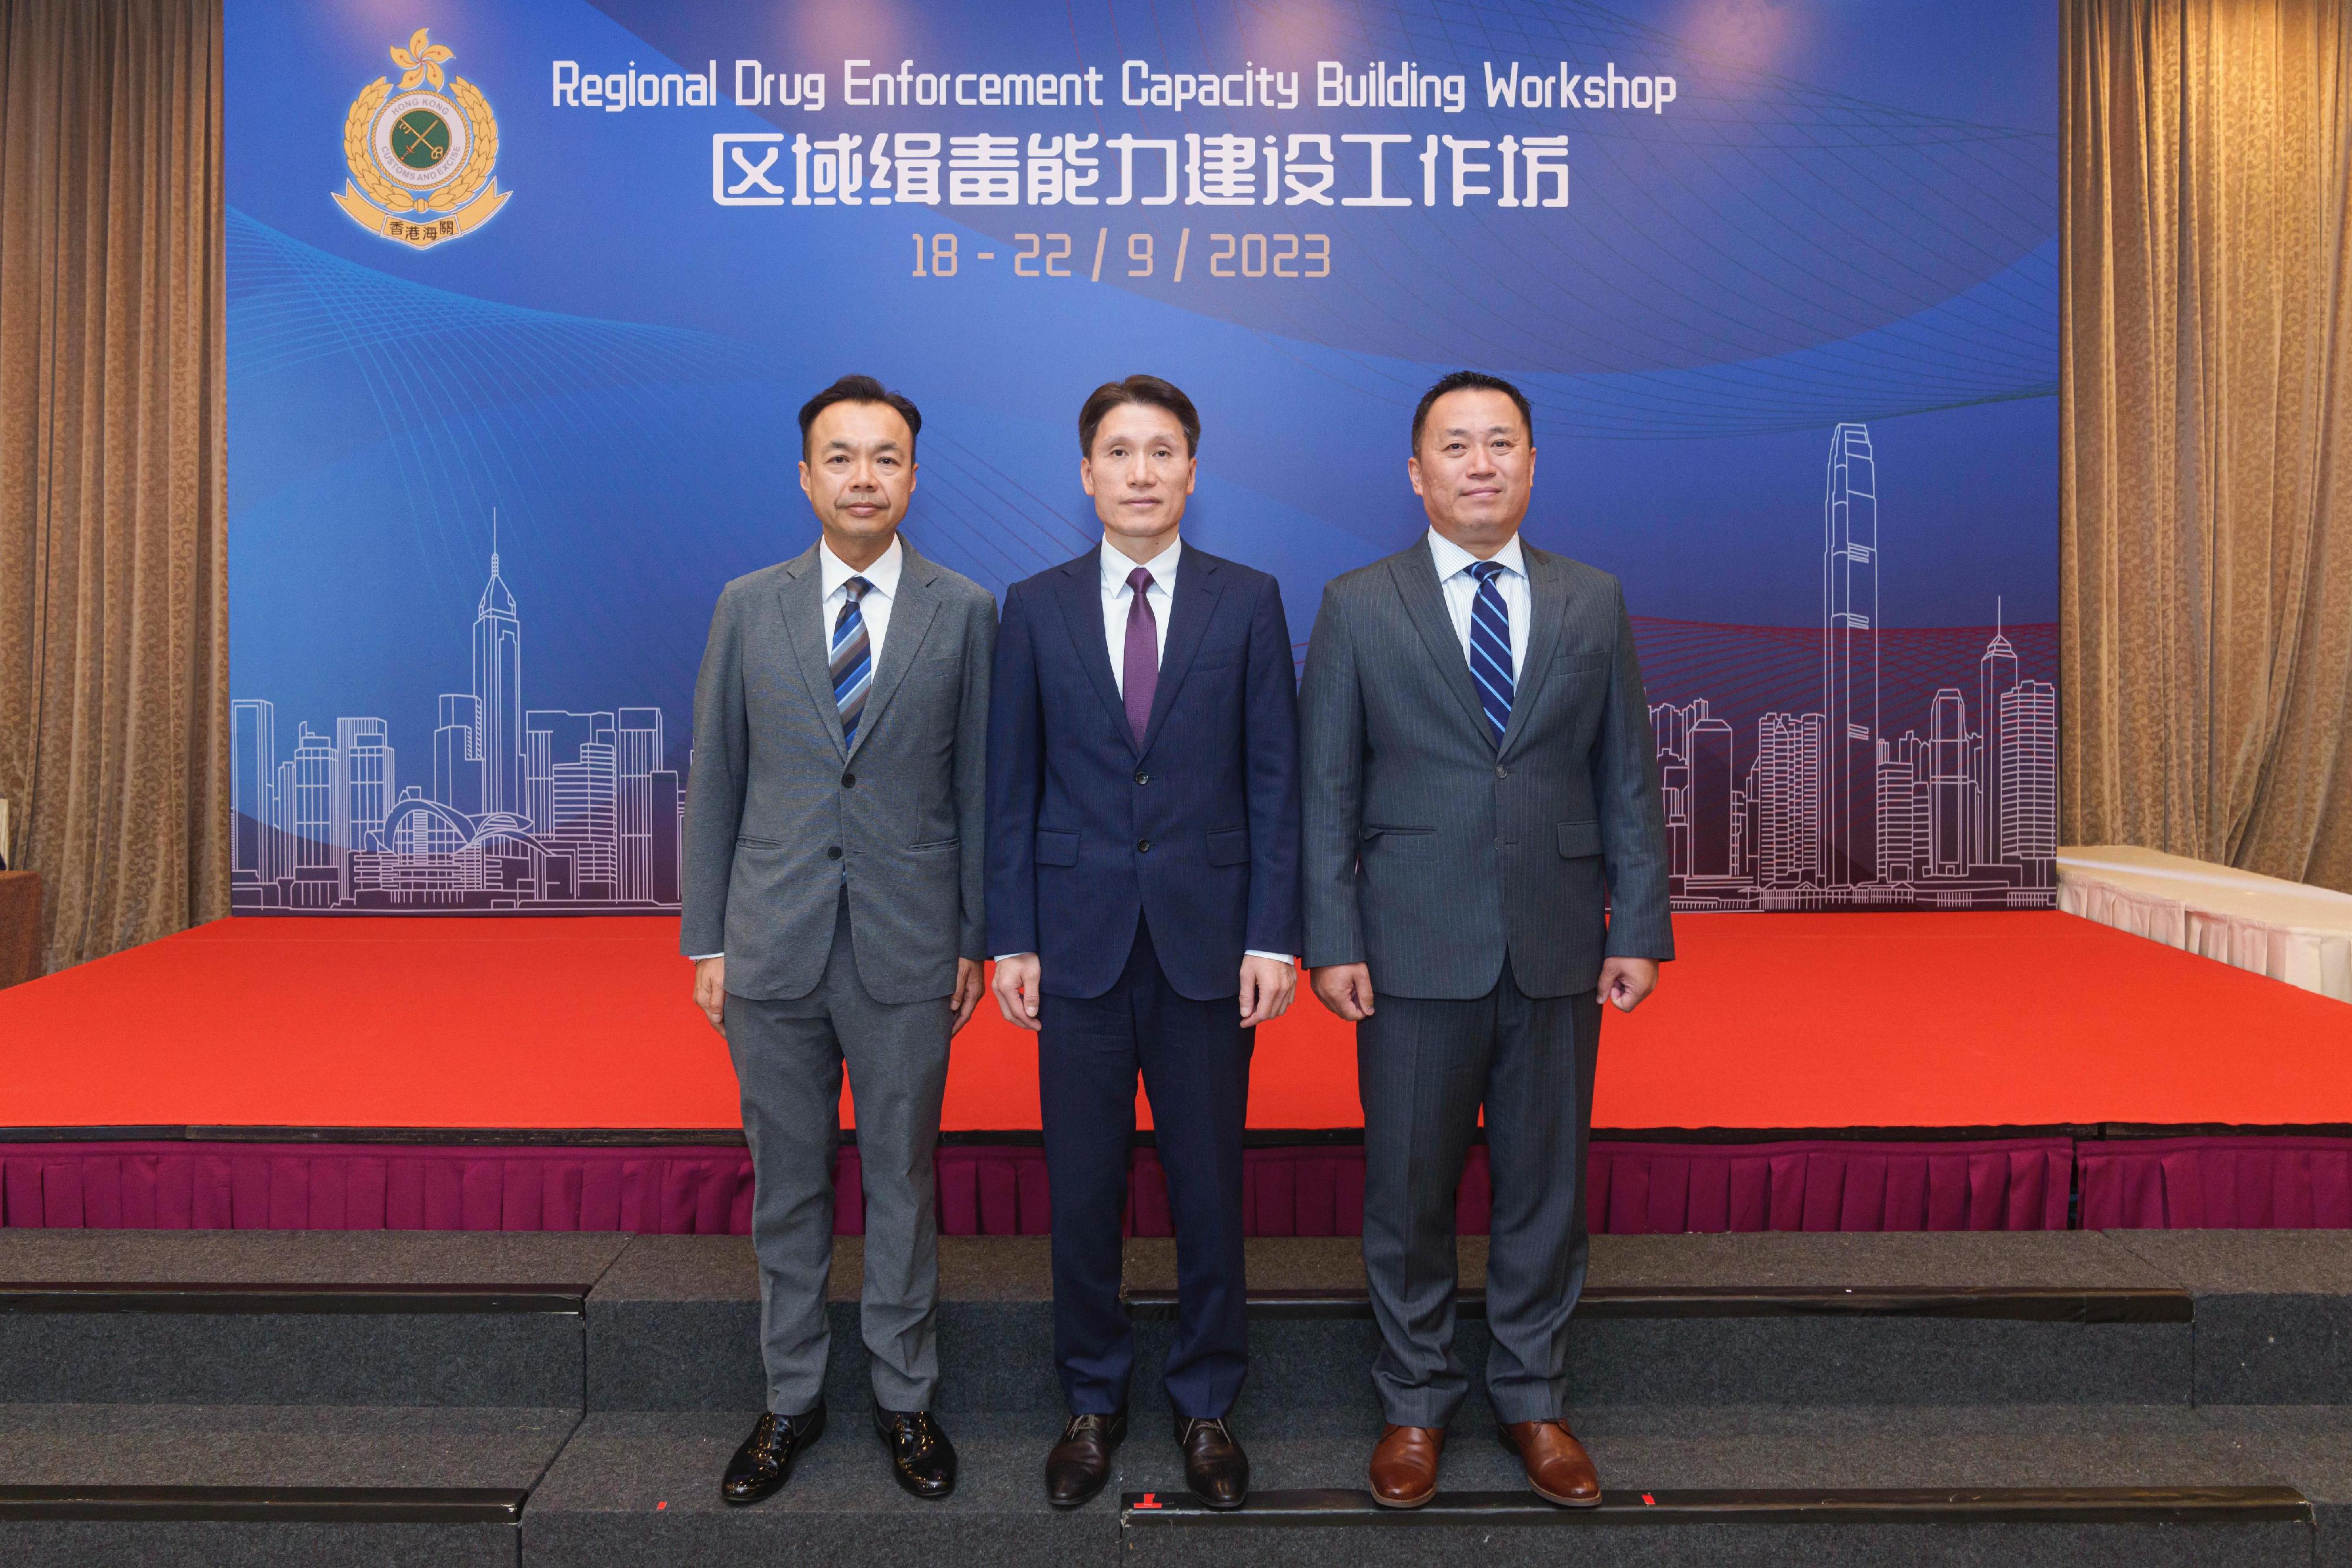 The Customs and Excise Department of Hong Kong will hold the Regional Drug Enforcement Capacity Building Workshop from today (September 18) to September 22. Forty-four representatives mainly from 24 law enforcement agencies from the Mainland, Asia-Pacific countries and regions, overseas offices stationed in the Asia-Pacific region, as well as international organisations including the International Narcotics Control Board and the World Customs Organization, will participate in the workshop throughout the week. The Assistant Commissioner (Intelligence and Investigation) of Customs and Excise, Mr Mark Woo (centre), was also present at the workshop. 